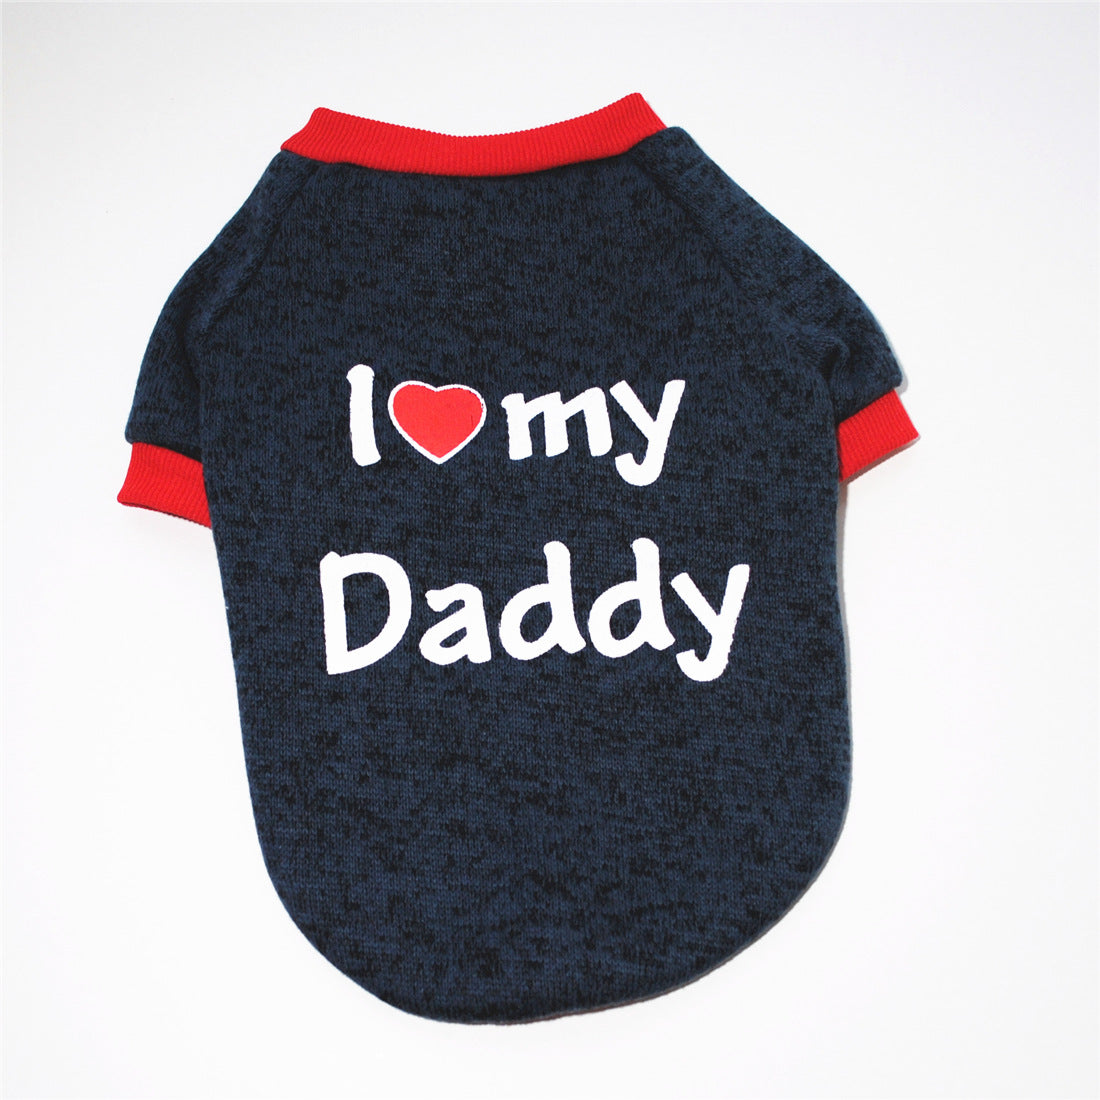 Love Daddy Mommy Hoodie - Furr Baby Gifts